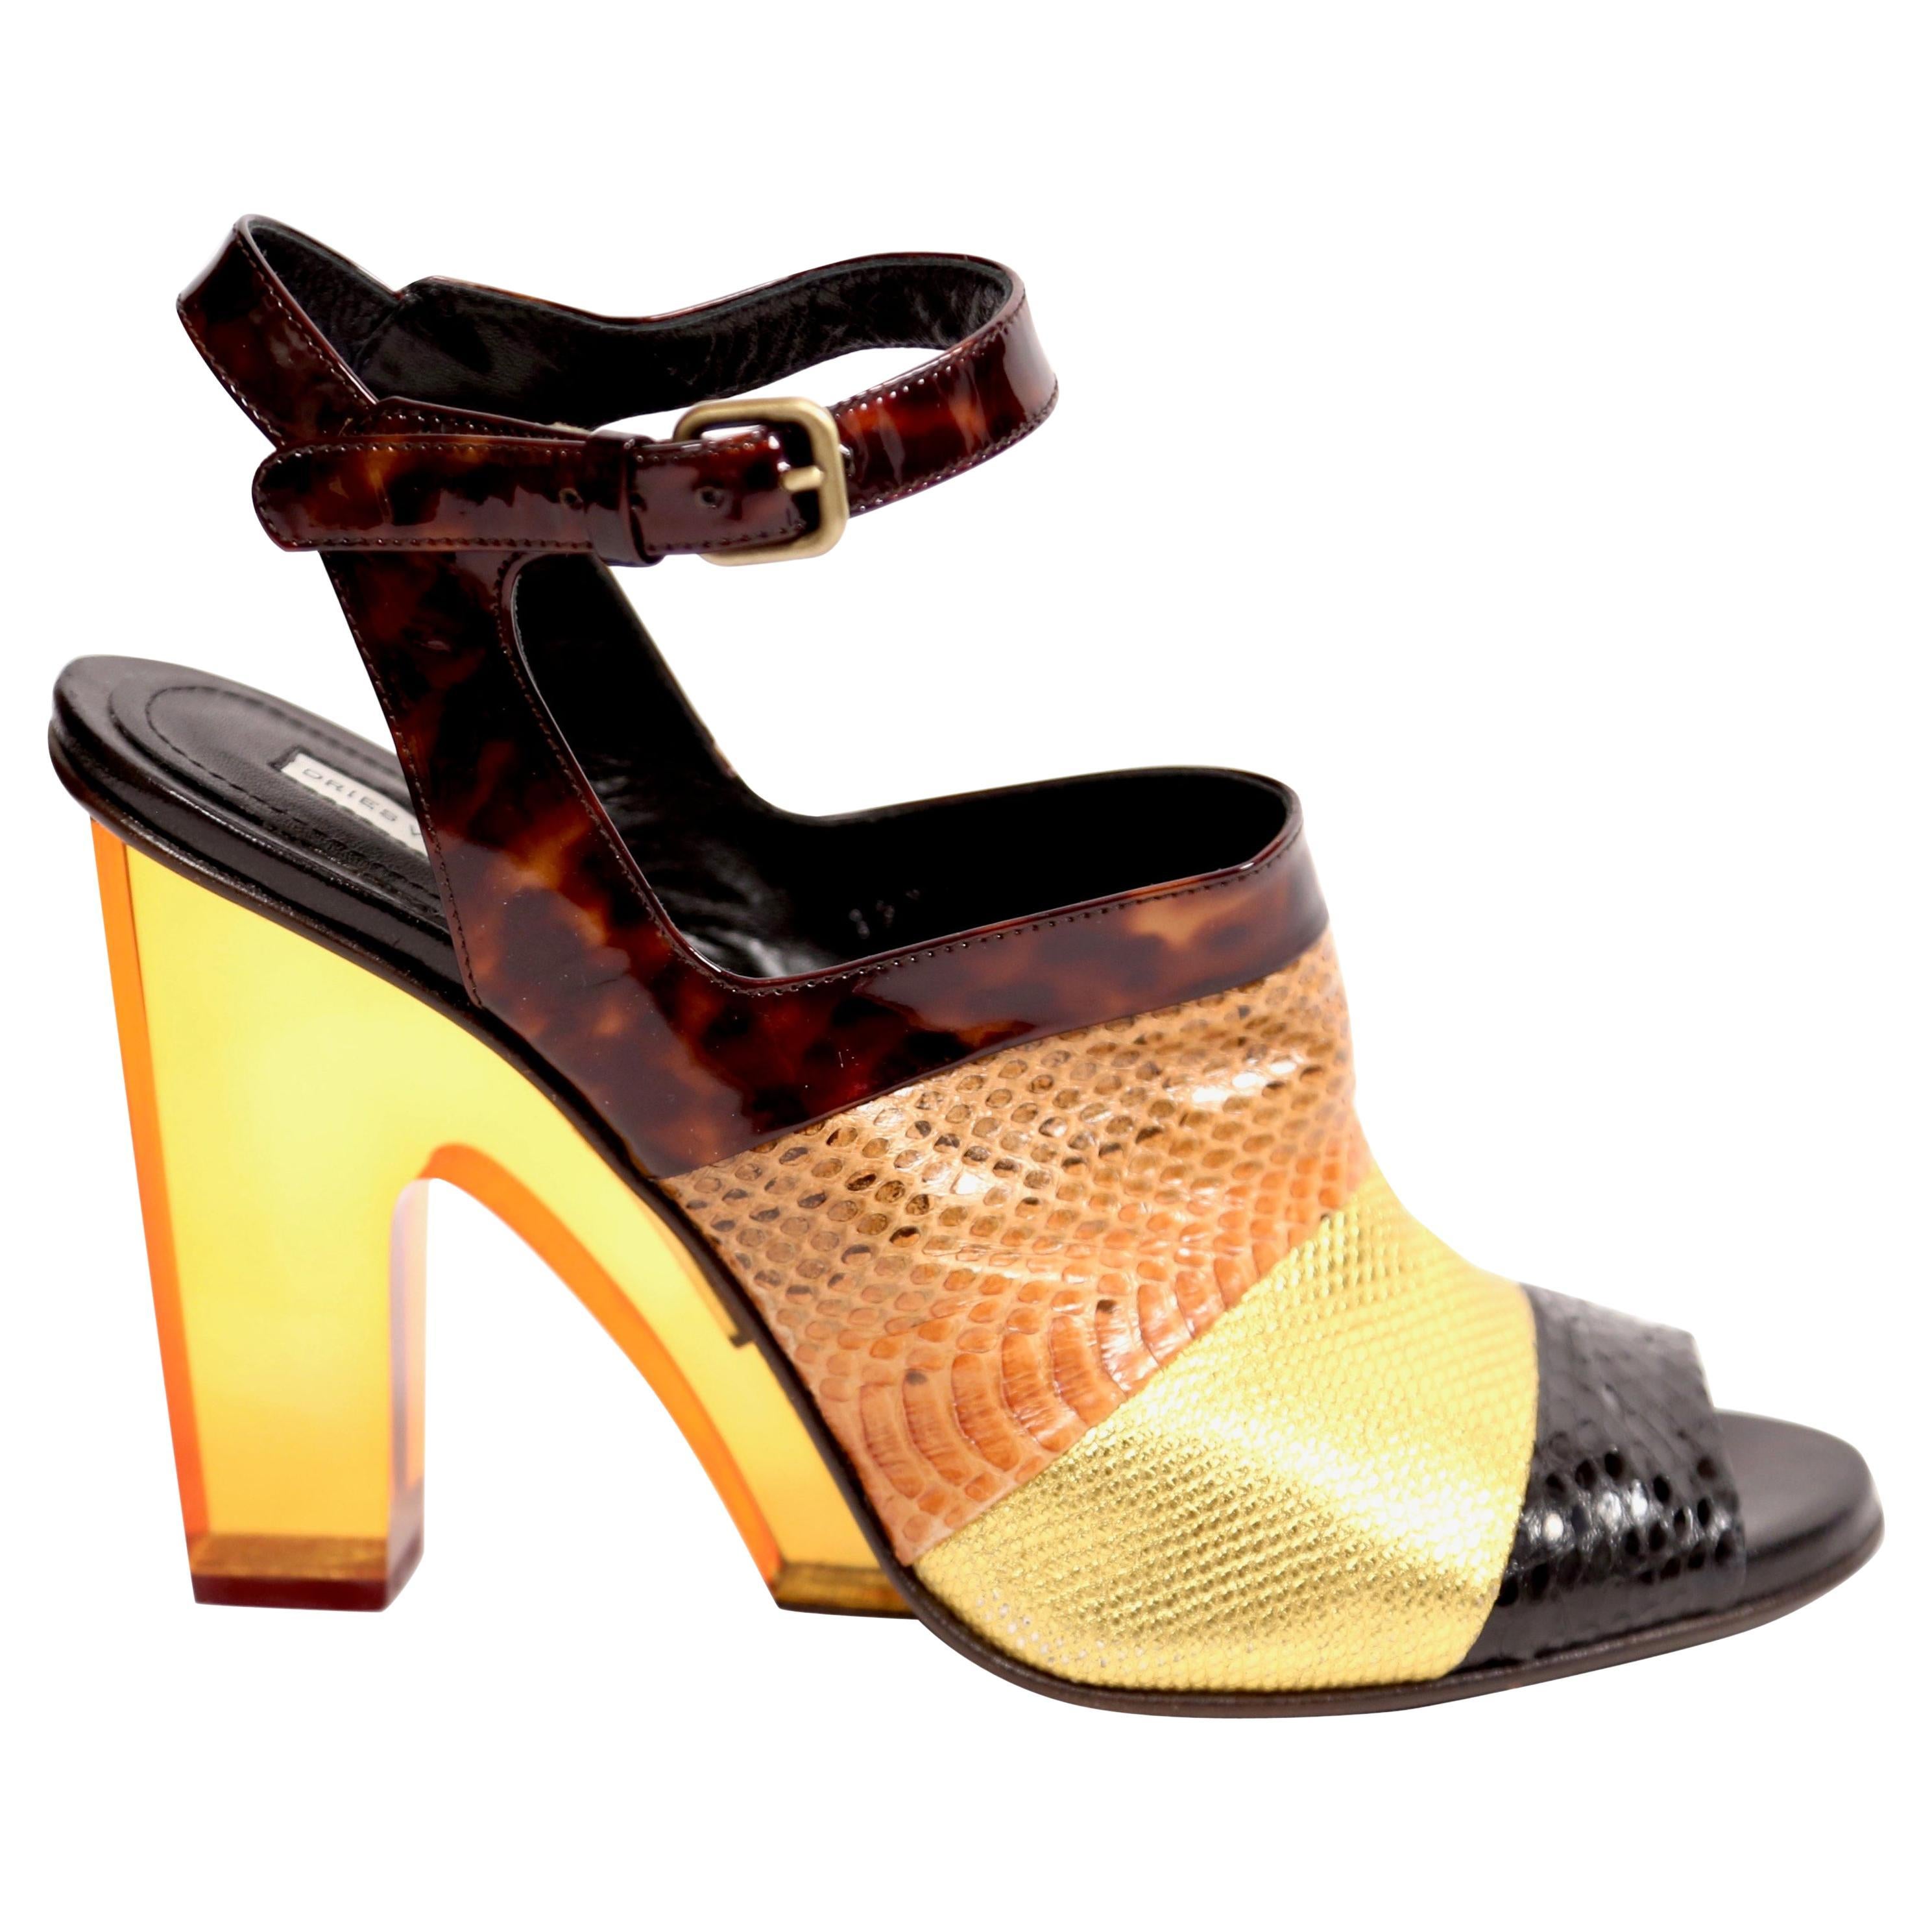 DRIES VAN NOTEN reptile leather shoes with lucite heels - 41 For Sale